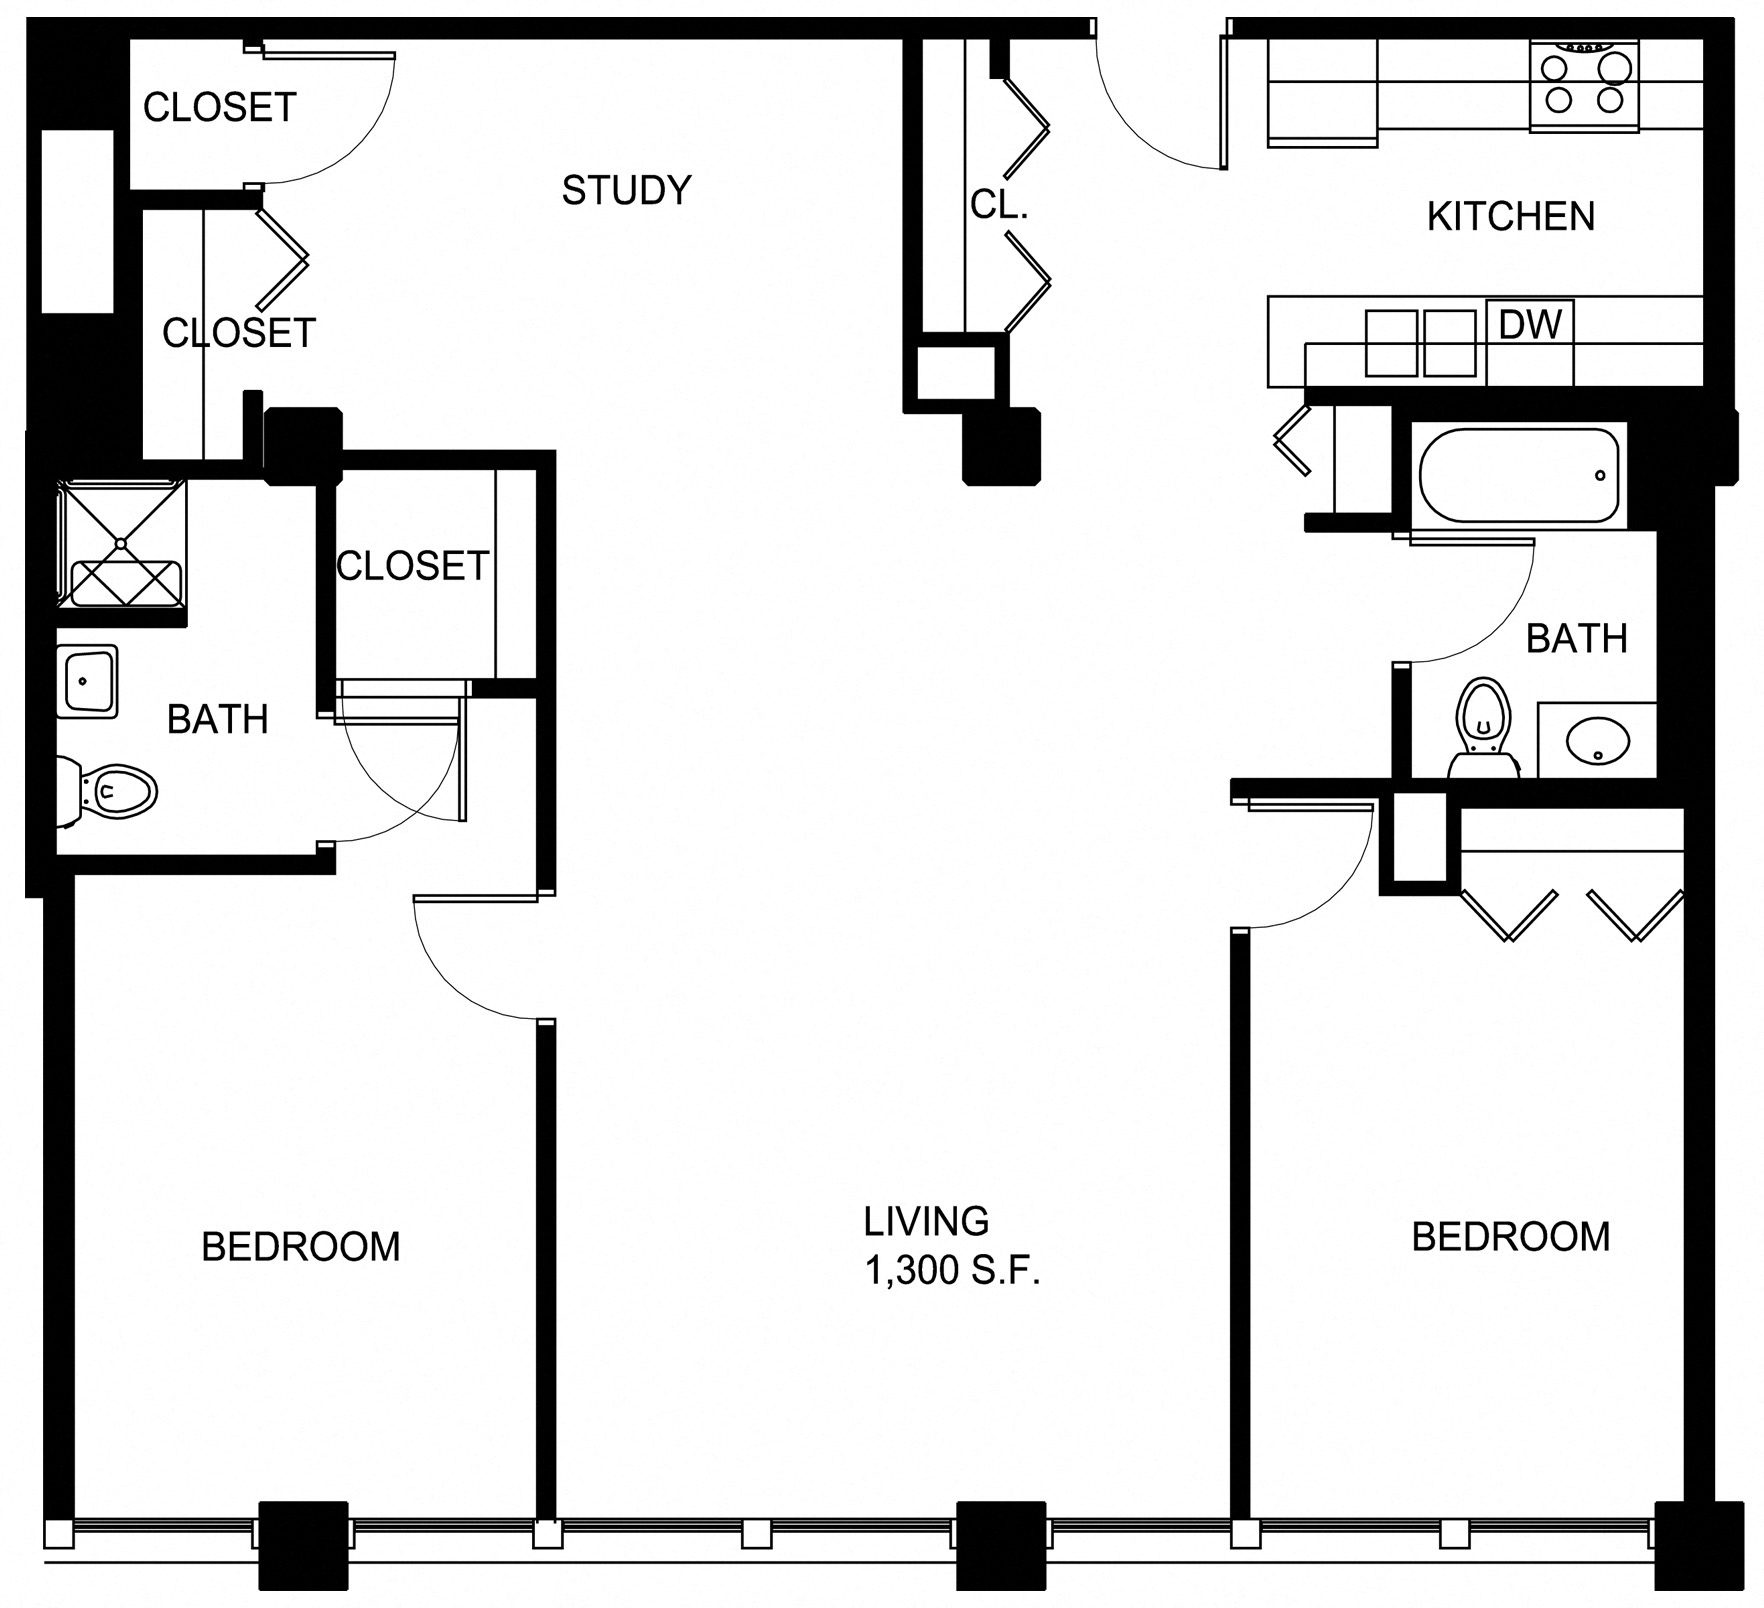 Floorplan for Apartment #P411, 2 bedroom unit at Halstead Providence